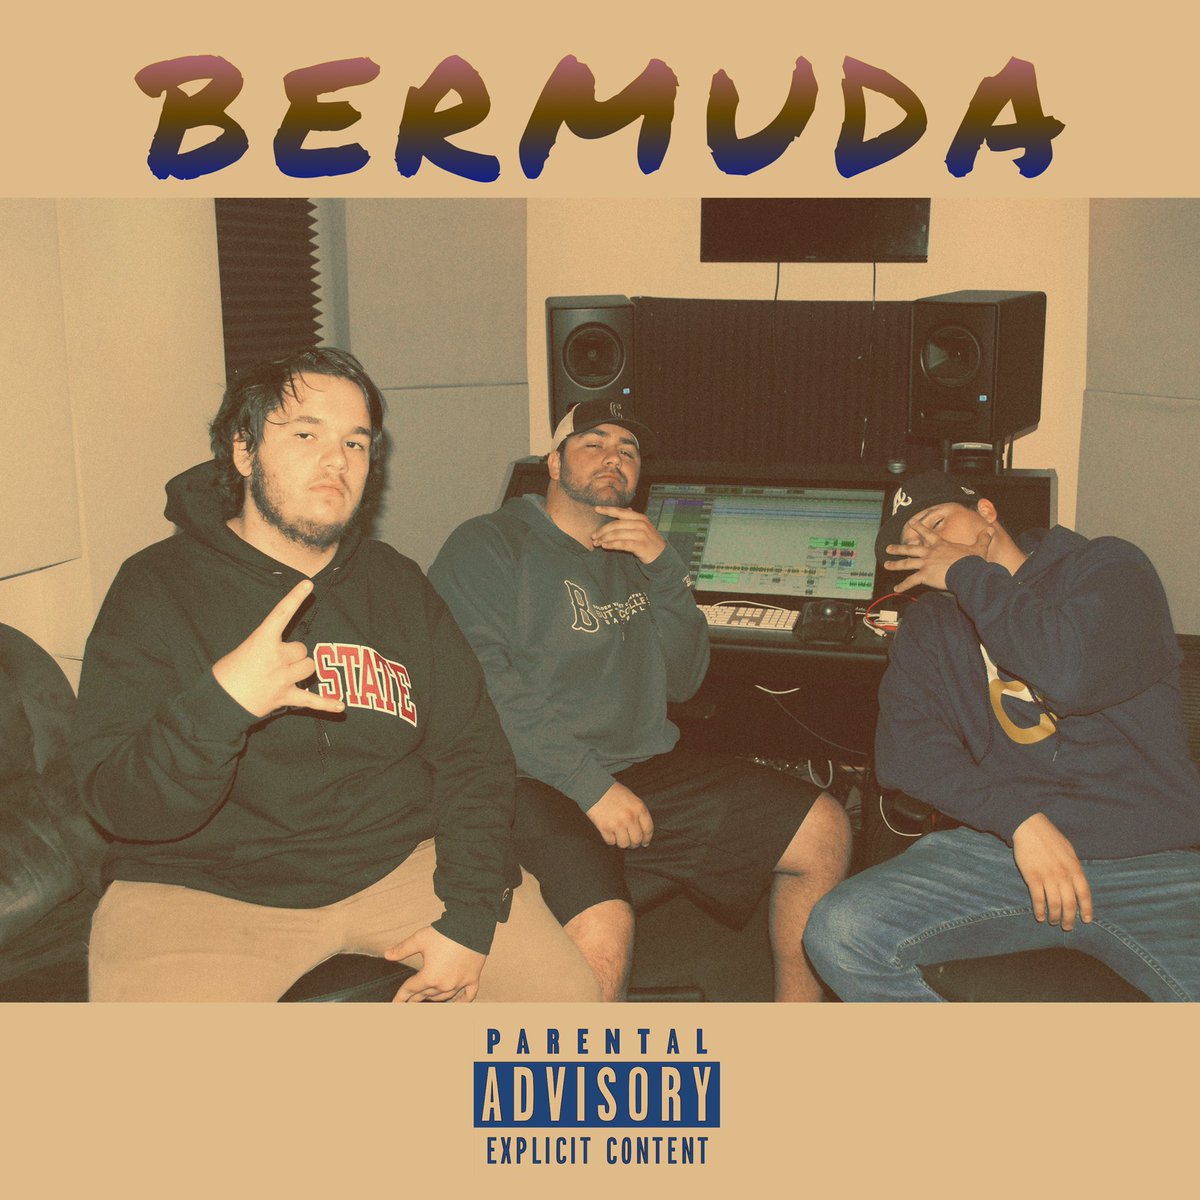 The three song EP that resembles the ferociousness of The BERMUDA 🔺
BERMUDA. OUT NOW. Link in Bio 💥
.
.
.
#music #rapmusic #albumcover #ep #hiphop #rap 
#artist #rapstudio #communityuprise